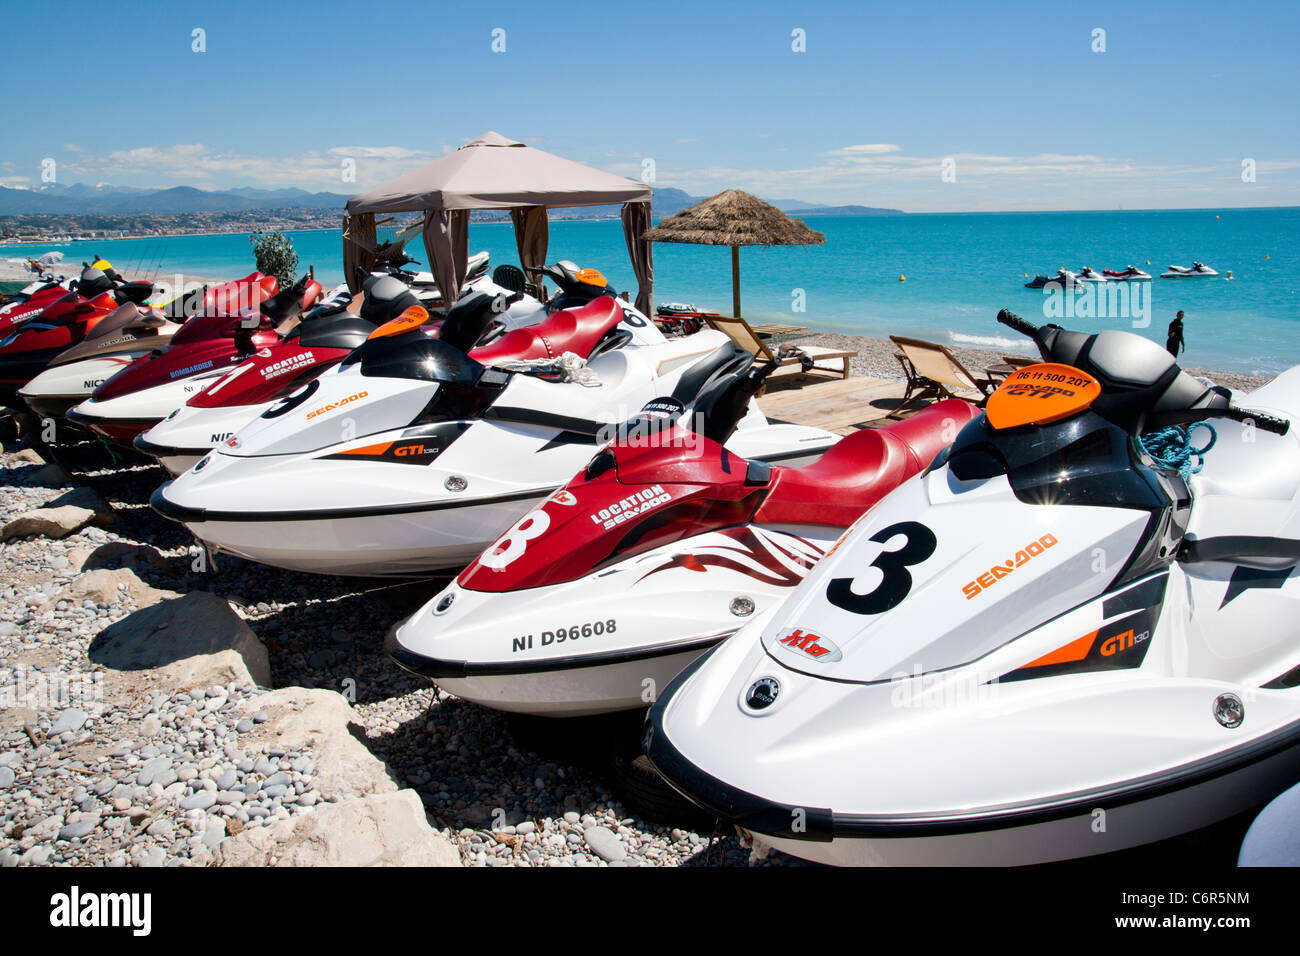 Jet ski's on a beach in the Cote d'Azur, France Stock Photo - Alamy